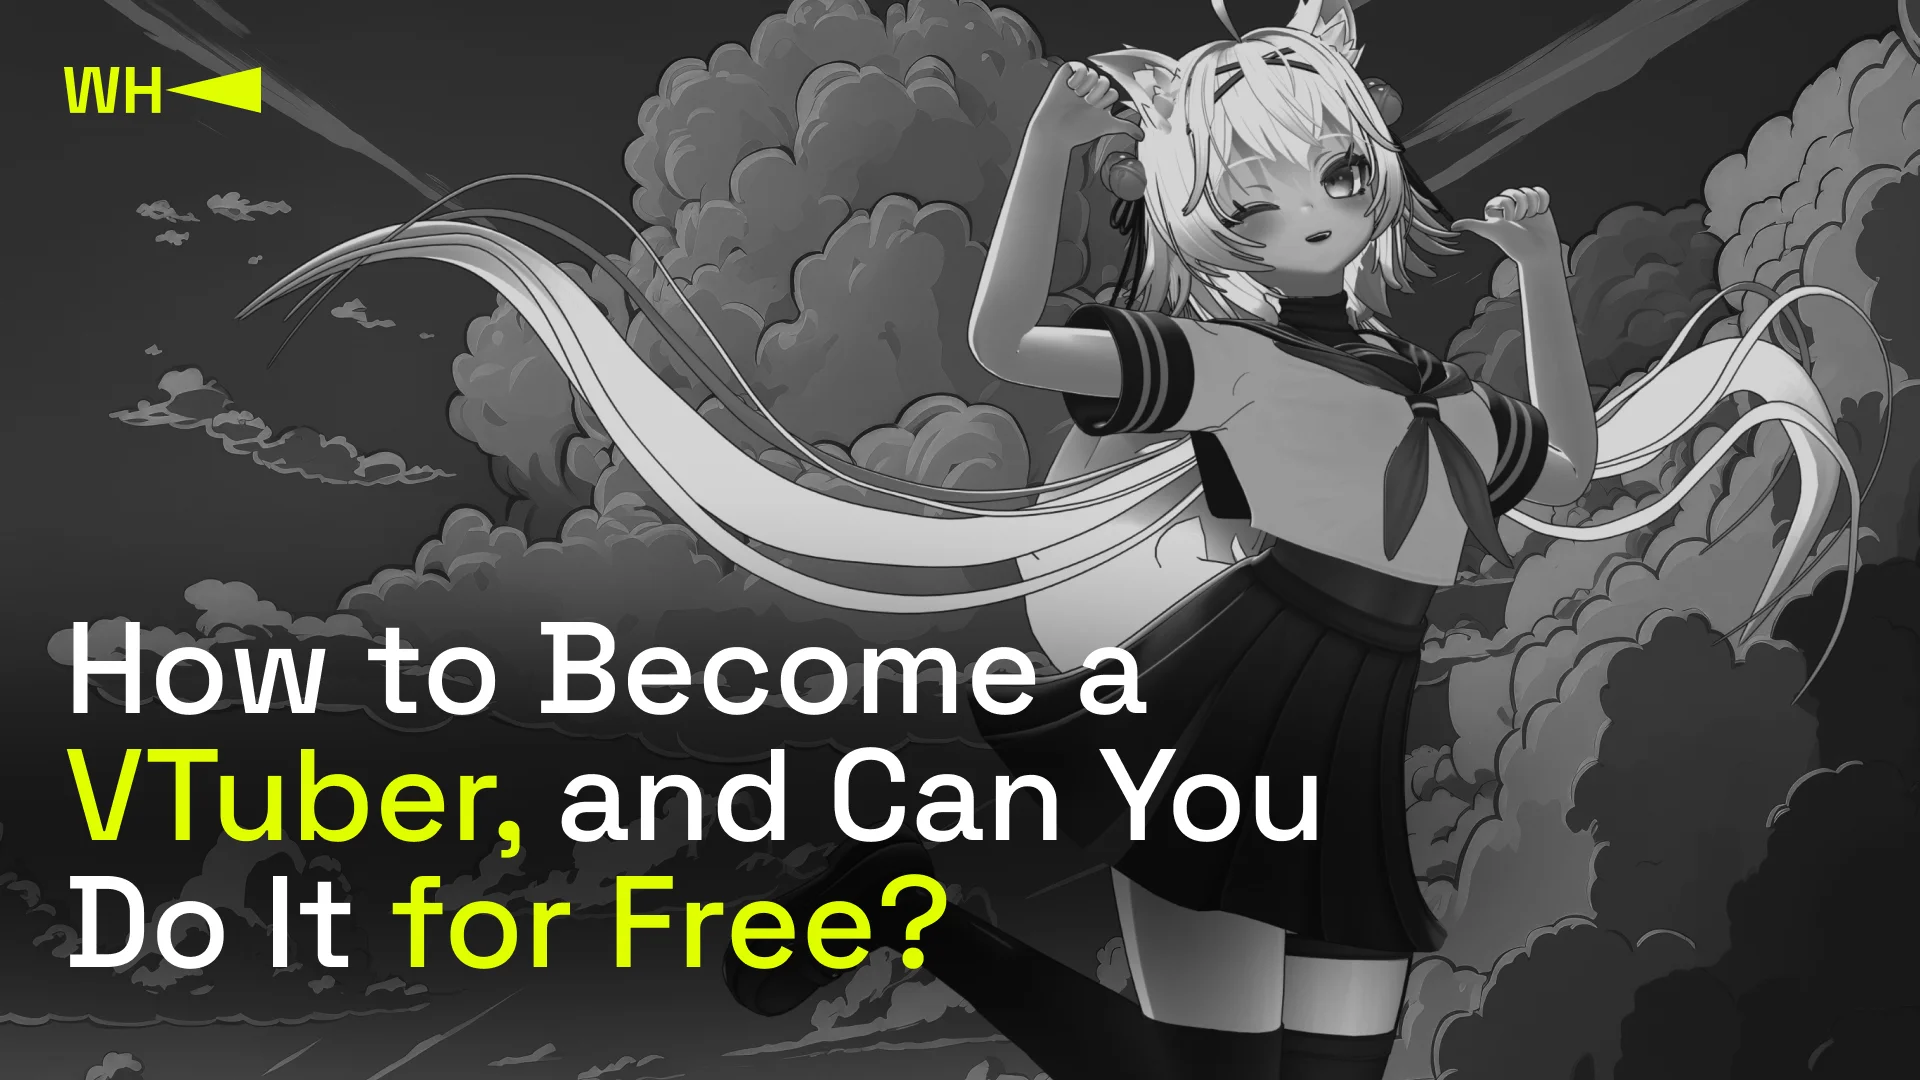 How to Become a VTuber, and Can You Do It for Free?